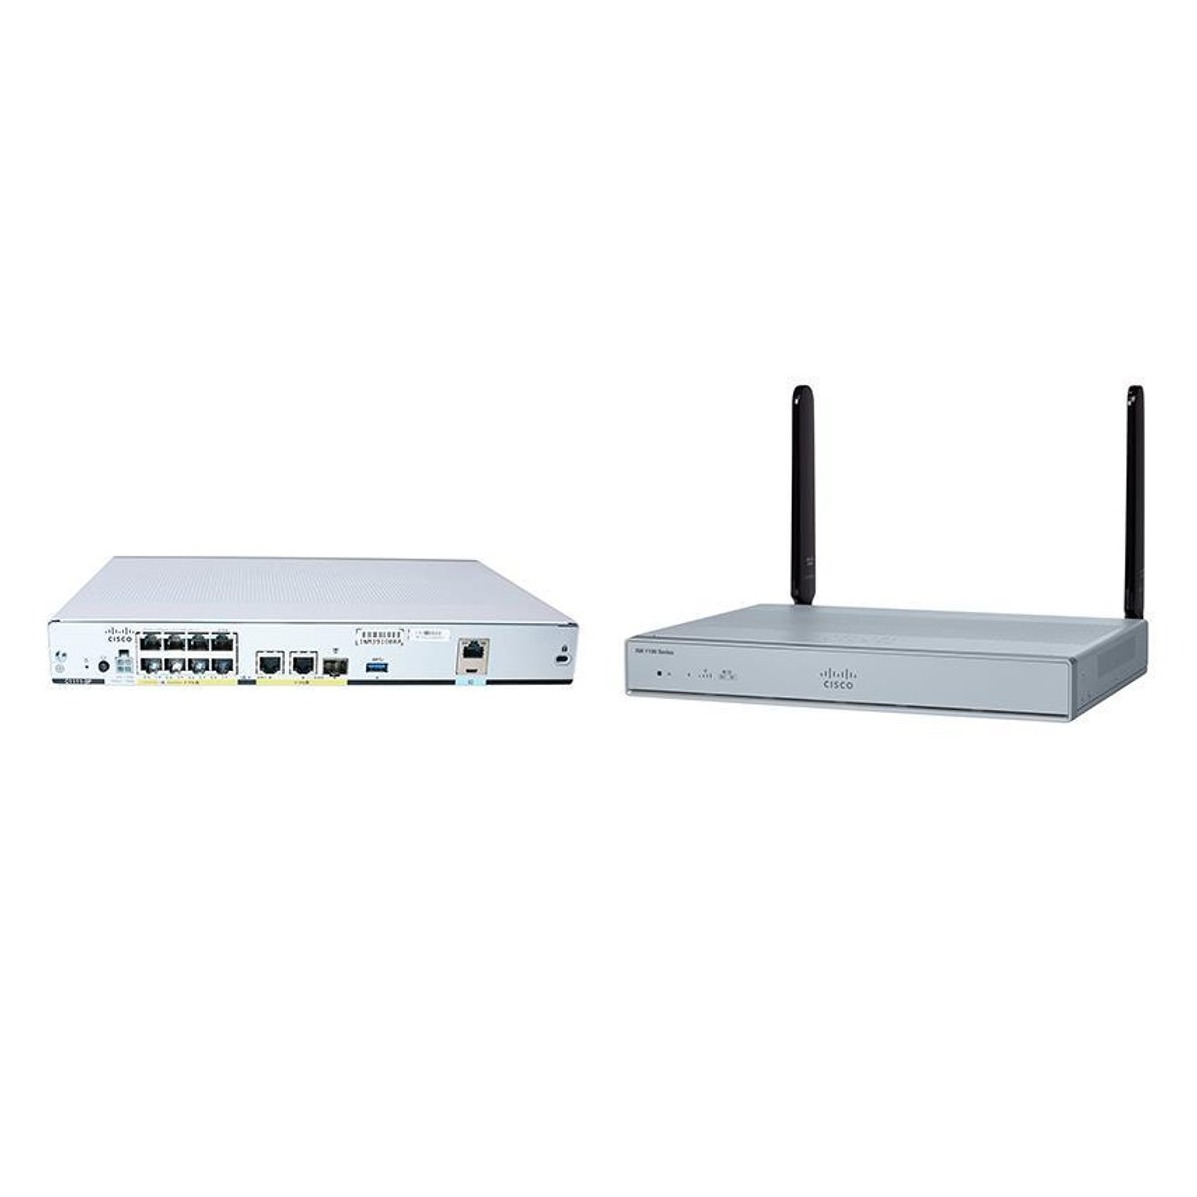 ISR 1100 8 Ports Dual GE Ethernet Router w/ 802.11ac -B WiFi.